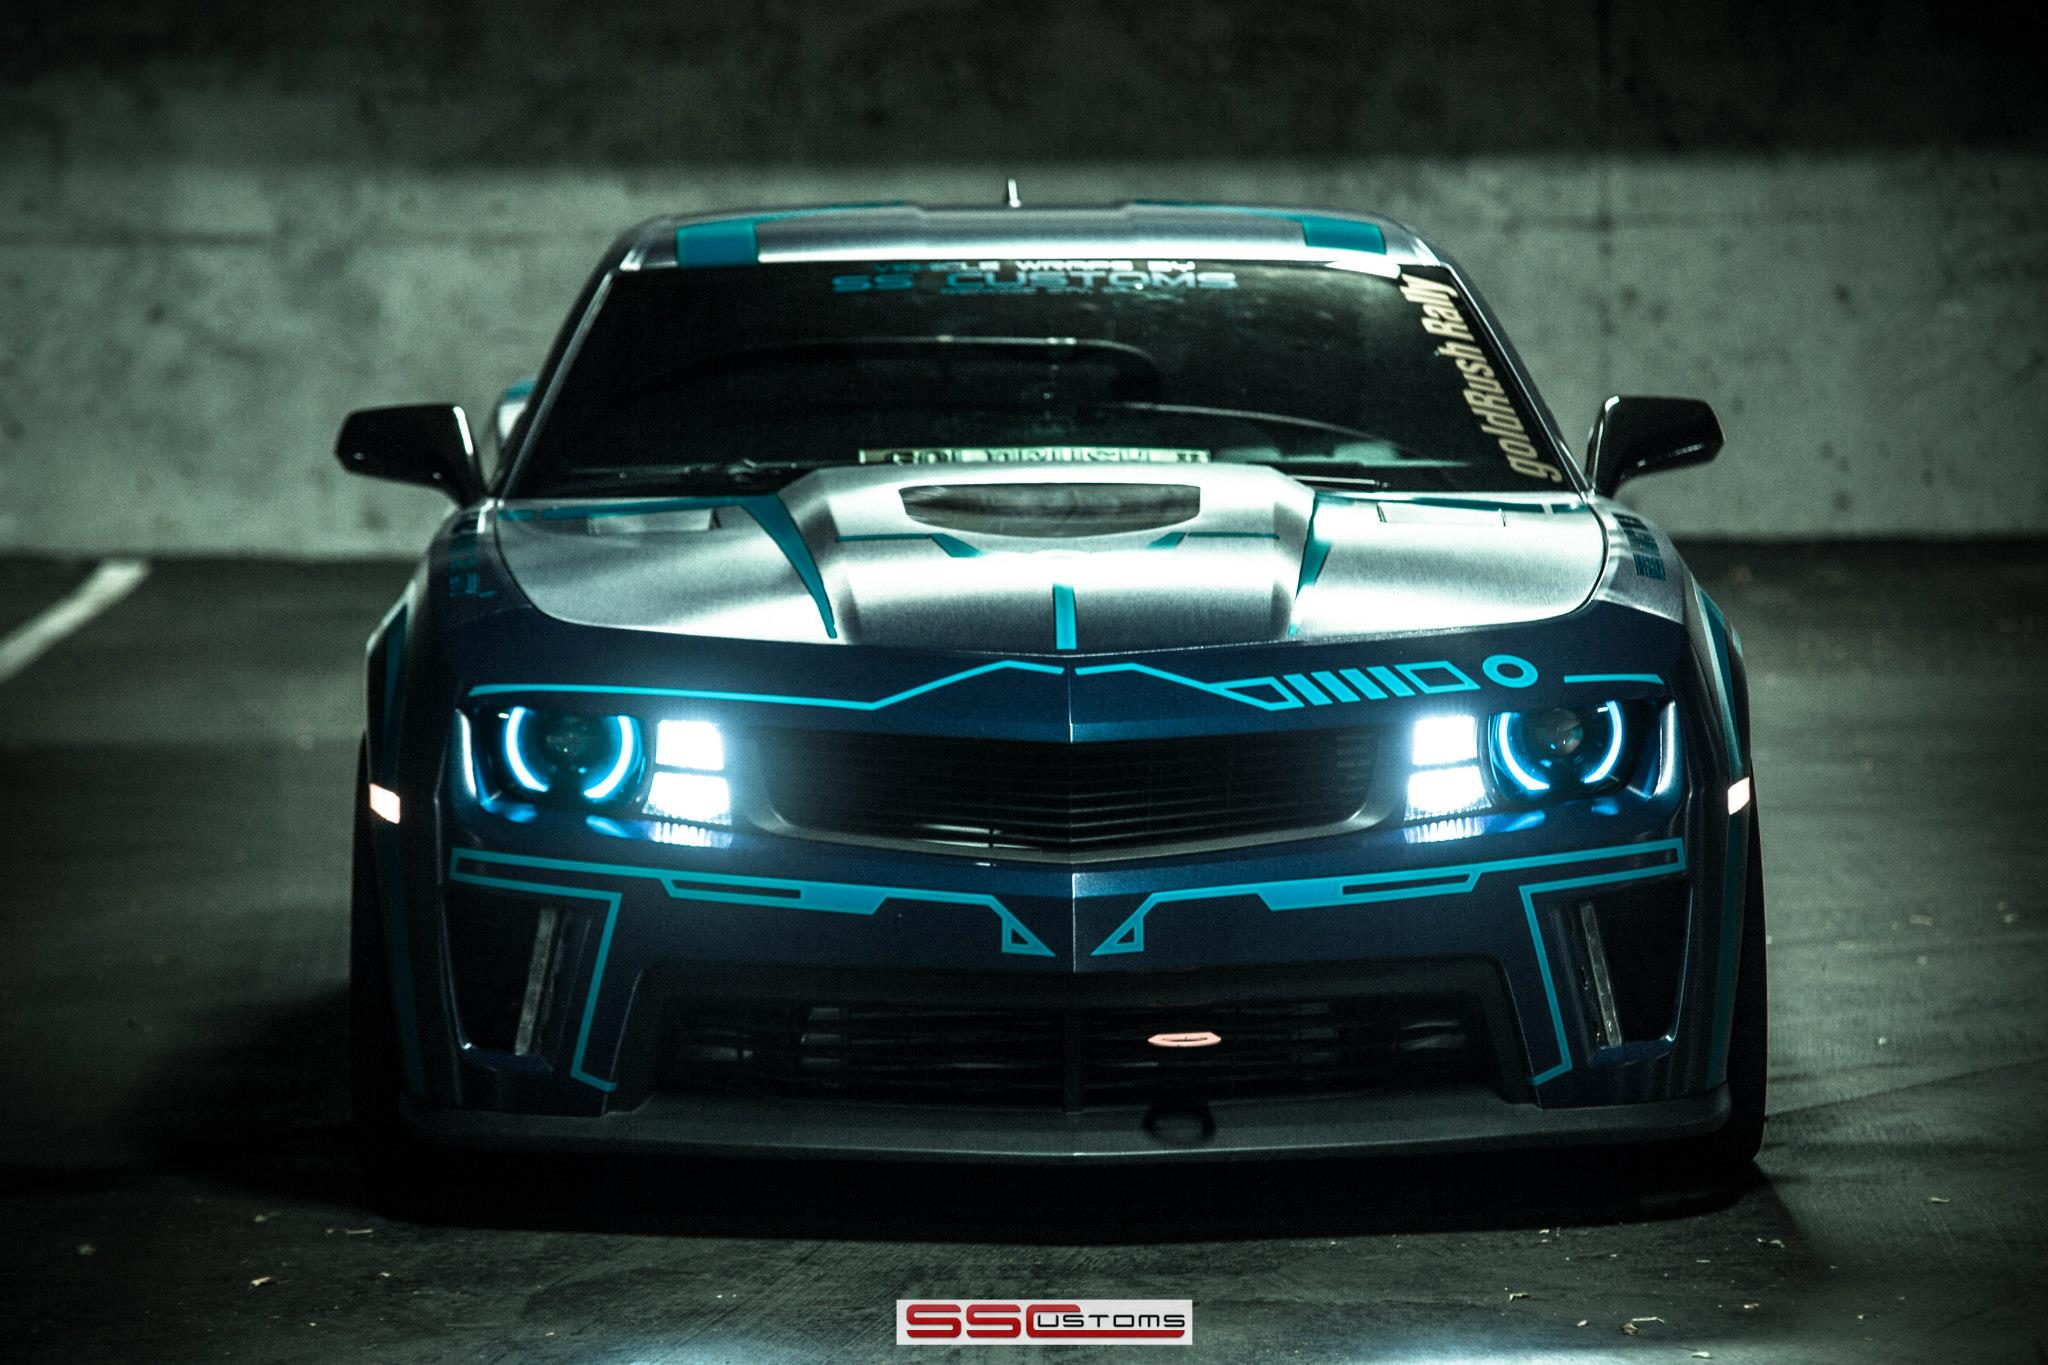 2013, Ss customs, Chevrolet, Camaro, Tuning, Muscle, Tron, Movies, Sci fi, Science, Sci Wallpaper